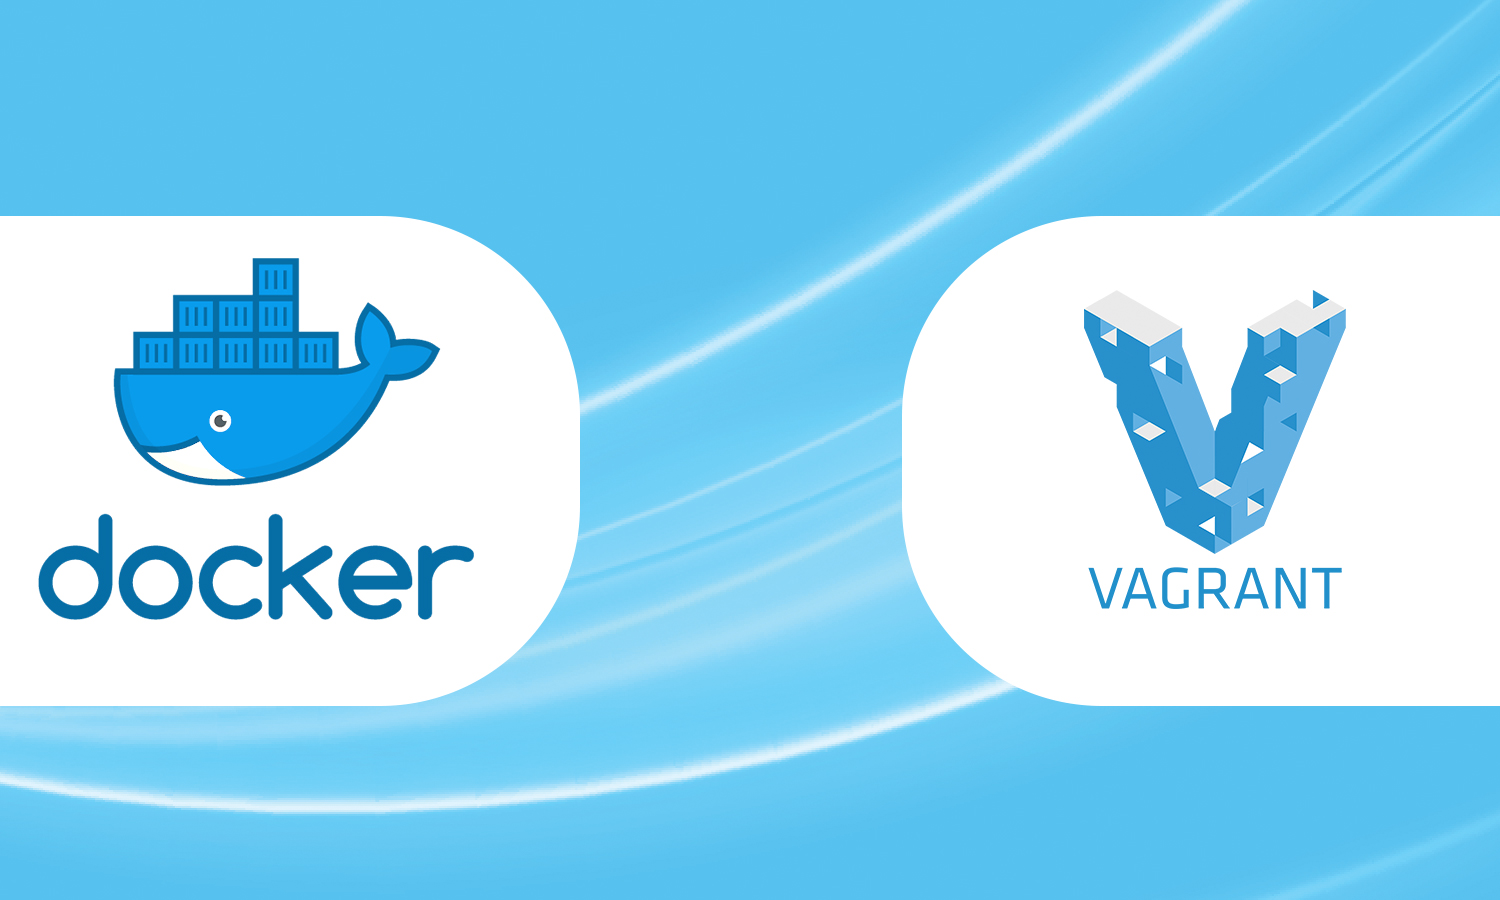 Docker vs Vagrant: Which of the two works best for the Software Development?